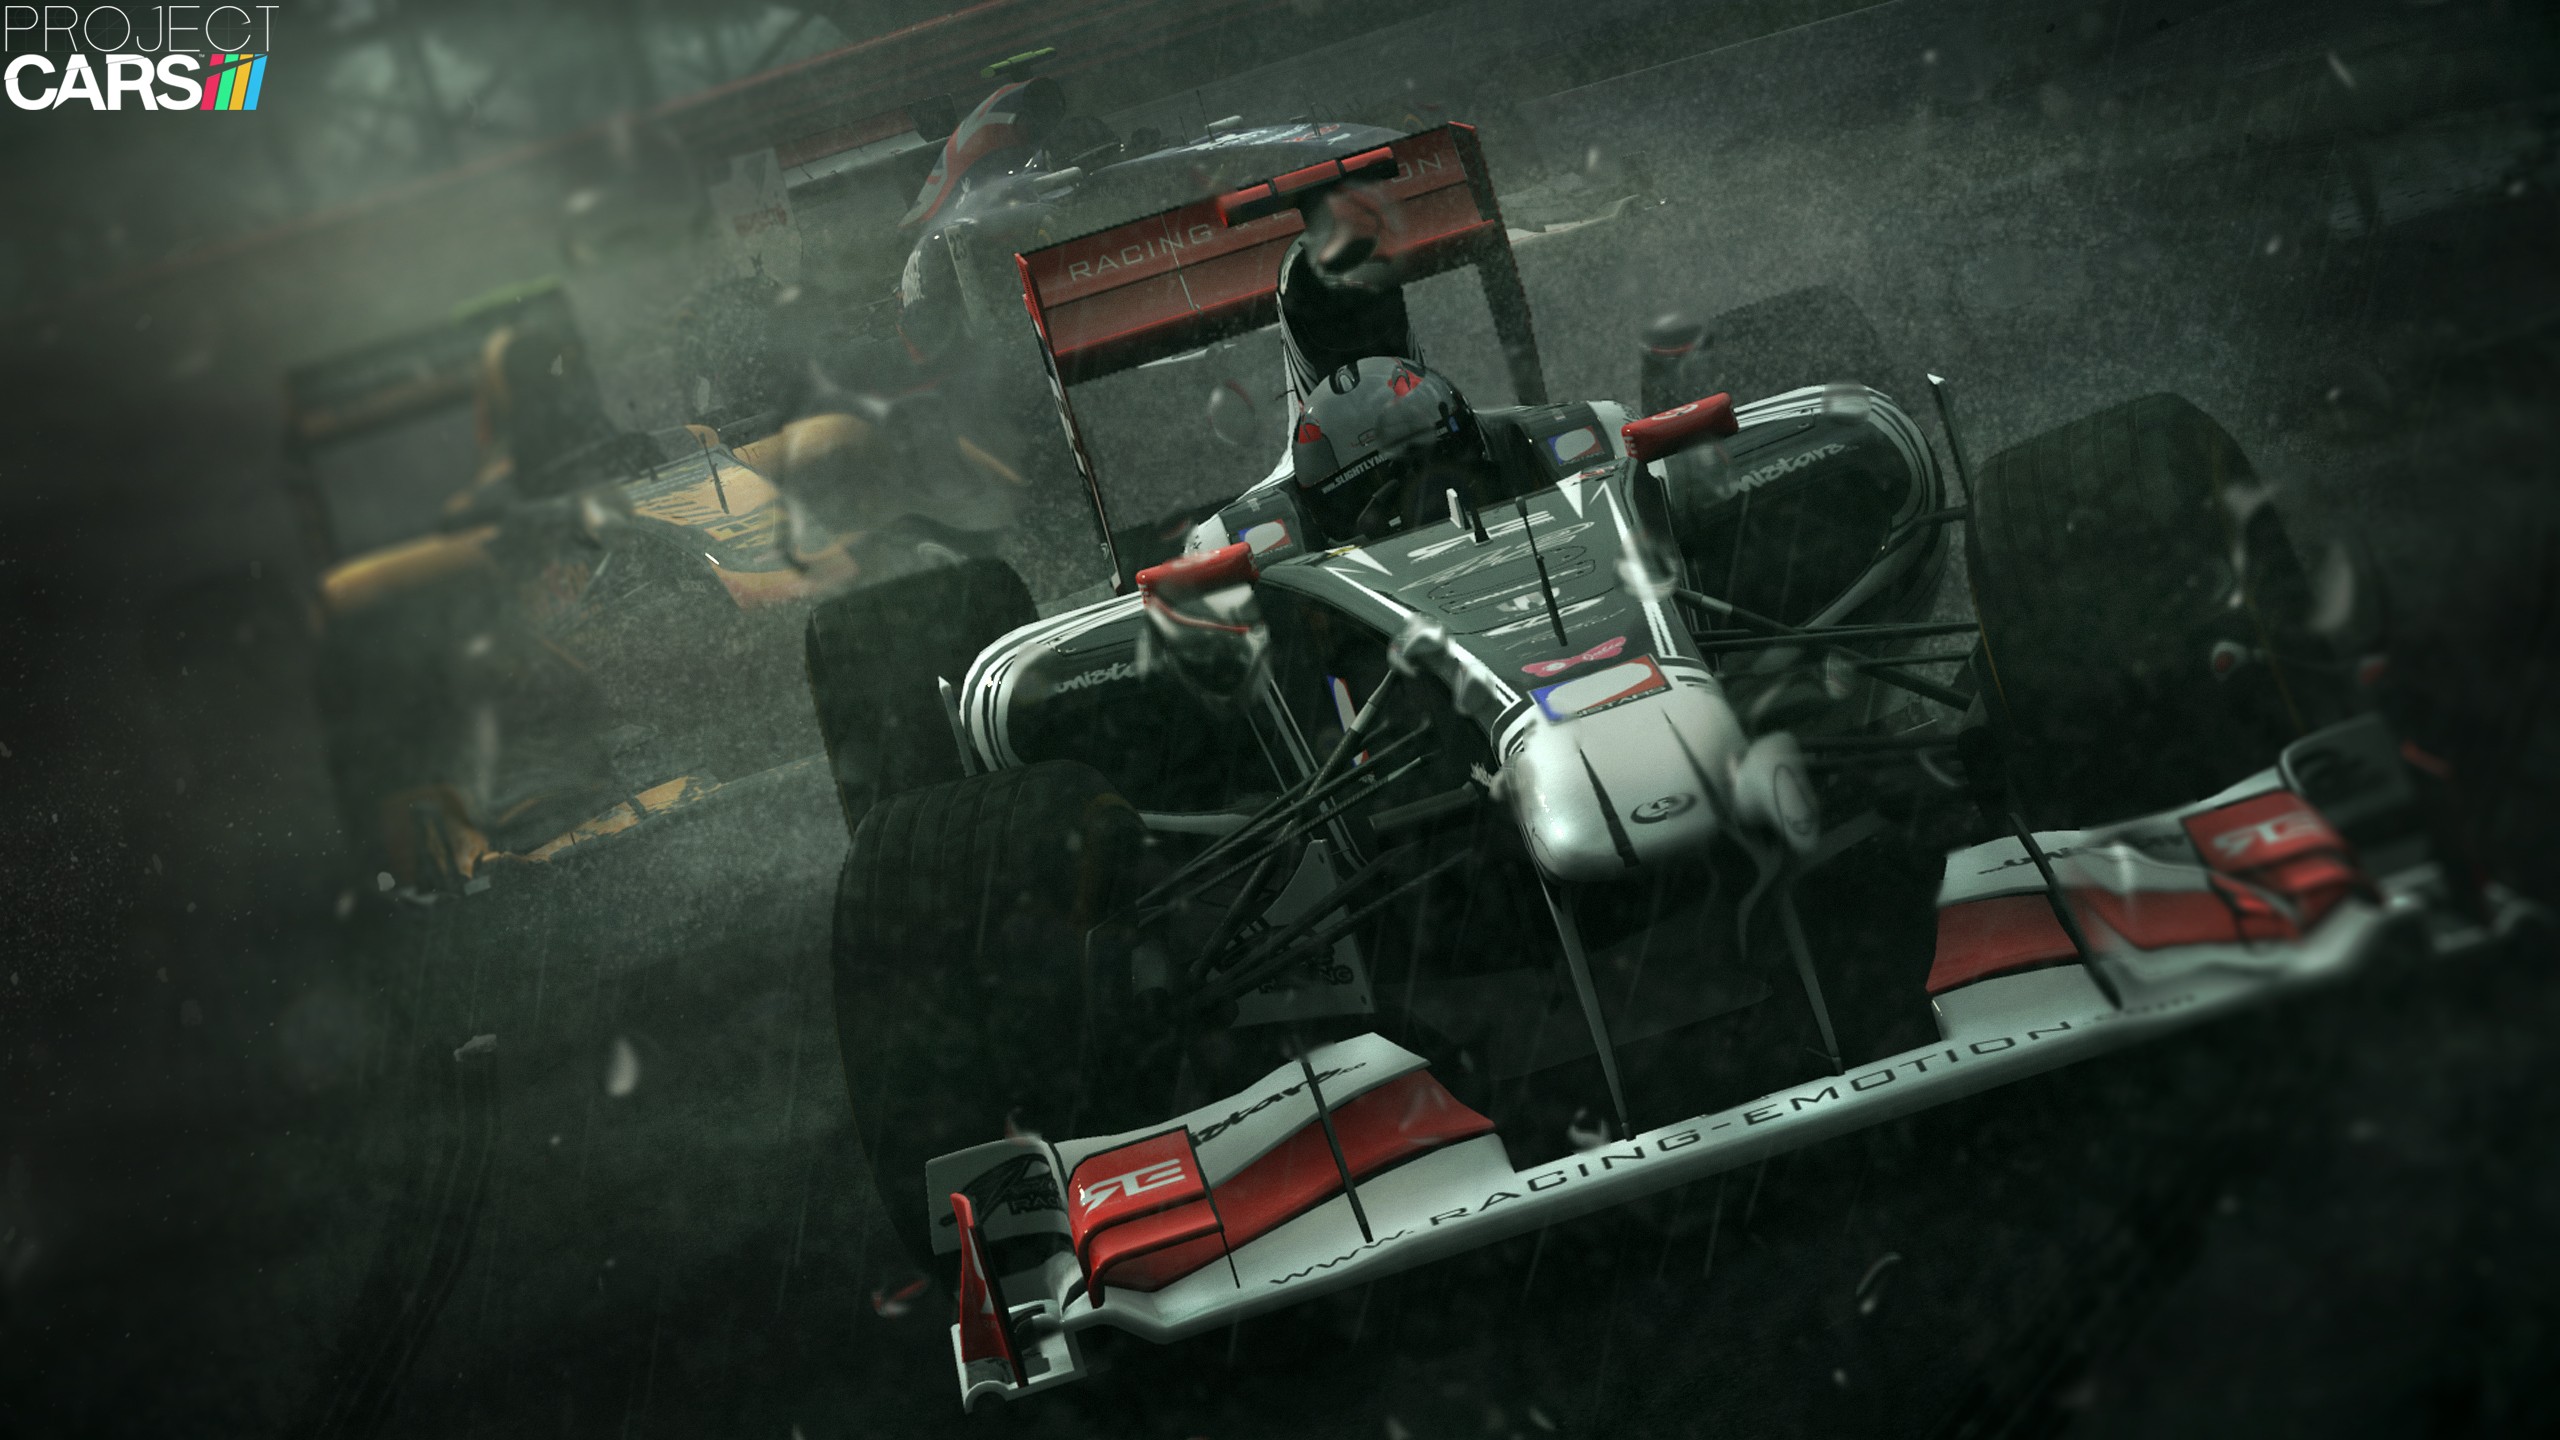 Project CARS, Video Games Wallpaper